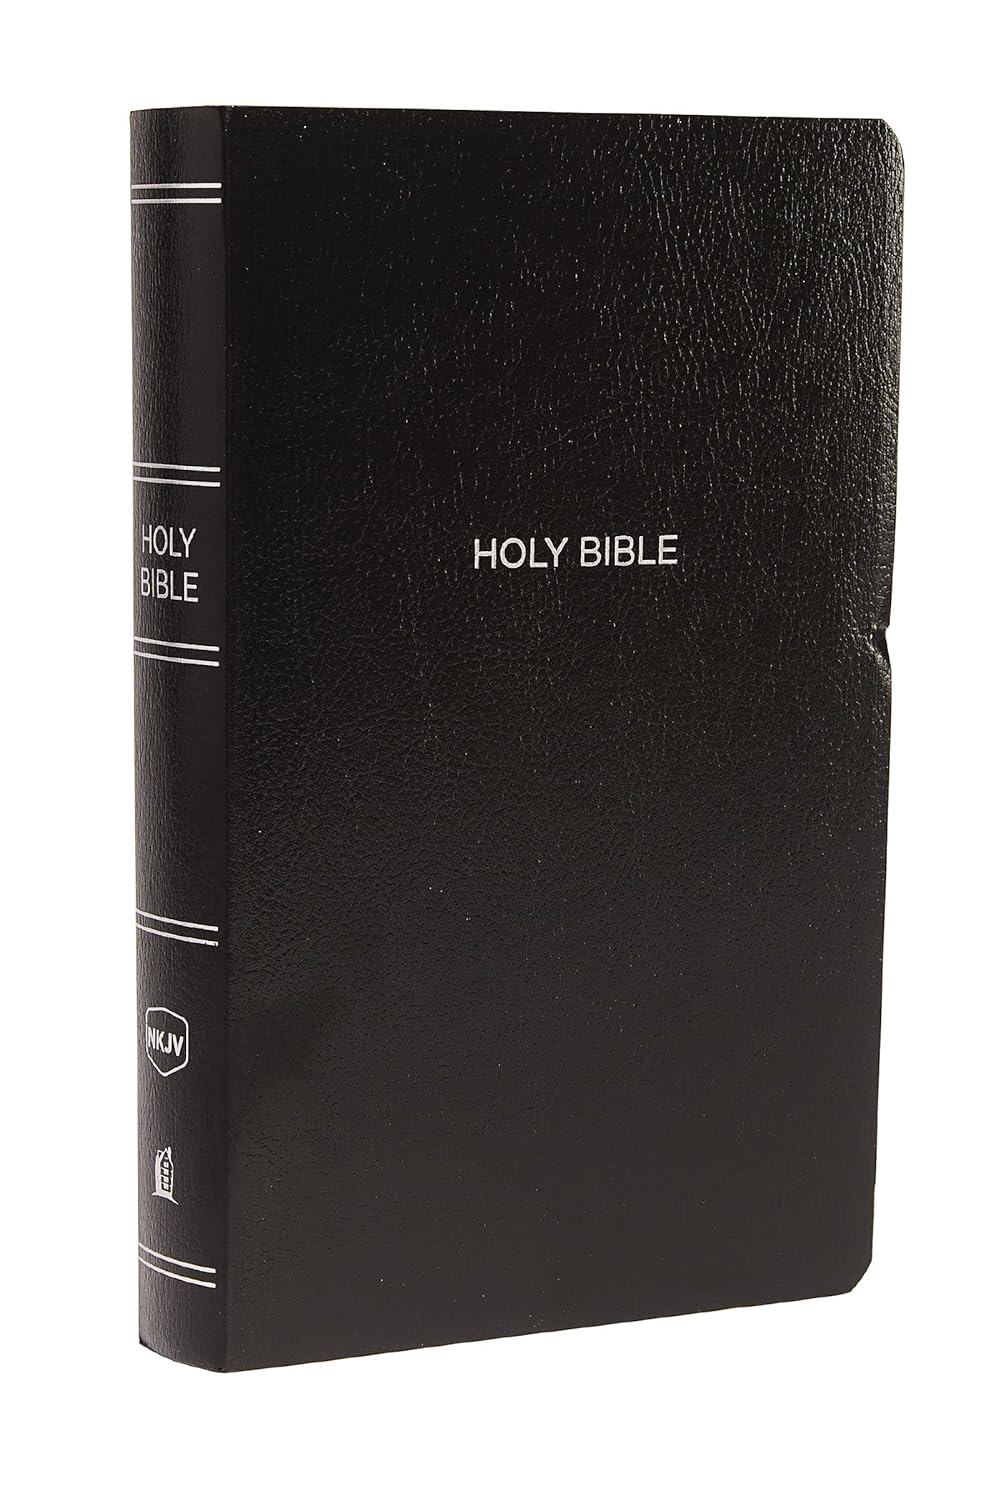 NKJV, Gift and Award Bible, Leather-Look, Black, Red Letter, Comfort Print: Holy Bible, New King James Version Imitation Leather – Import